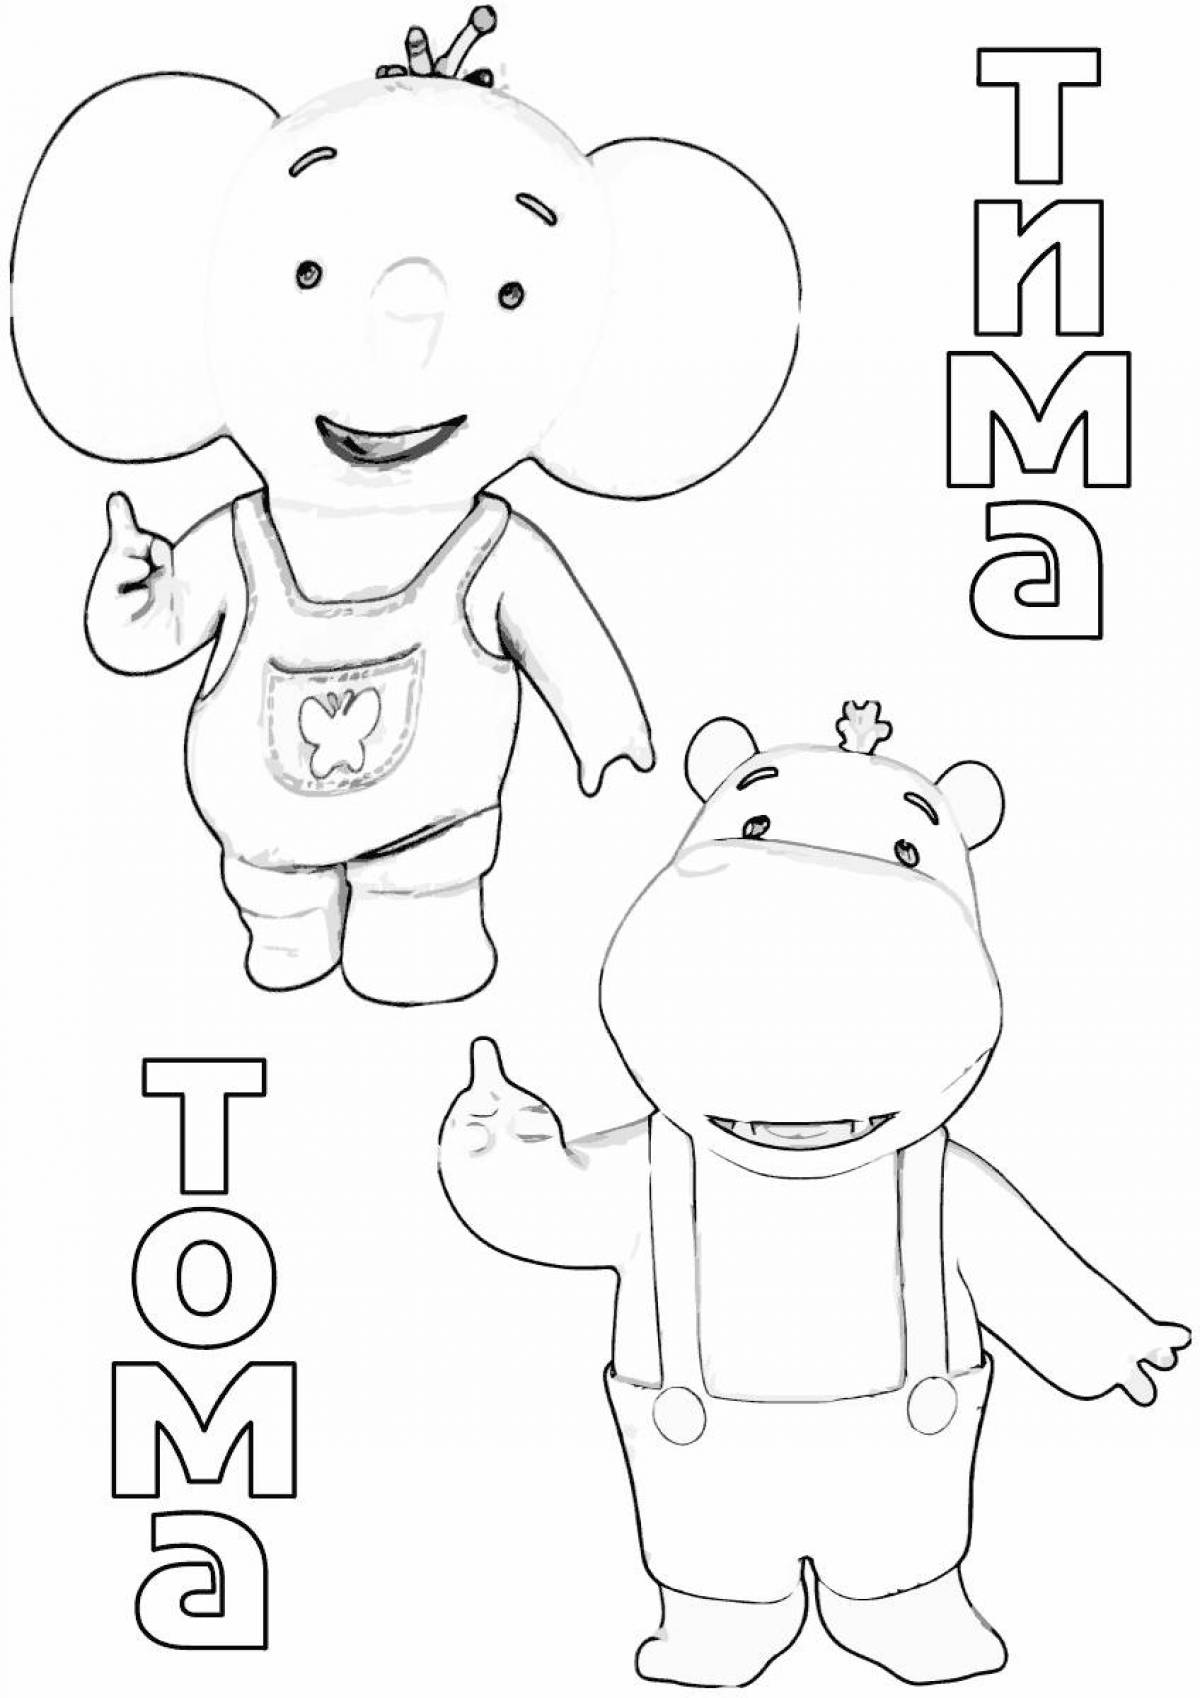 Tim the Hippo and Tom the Elephant